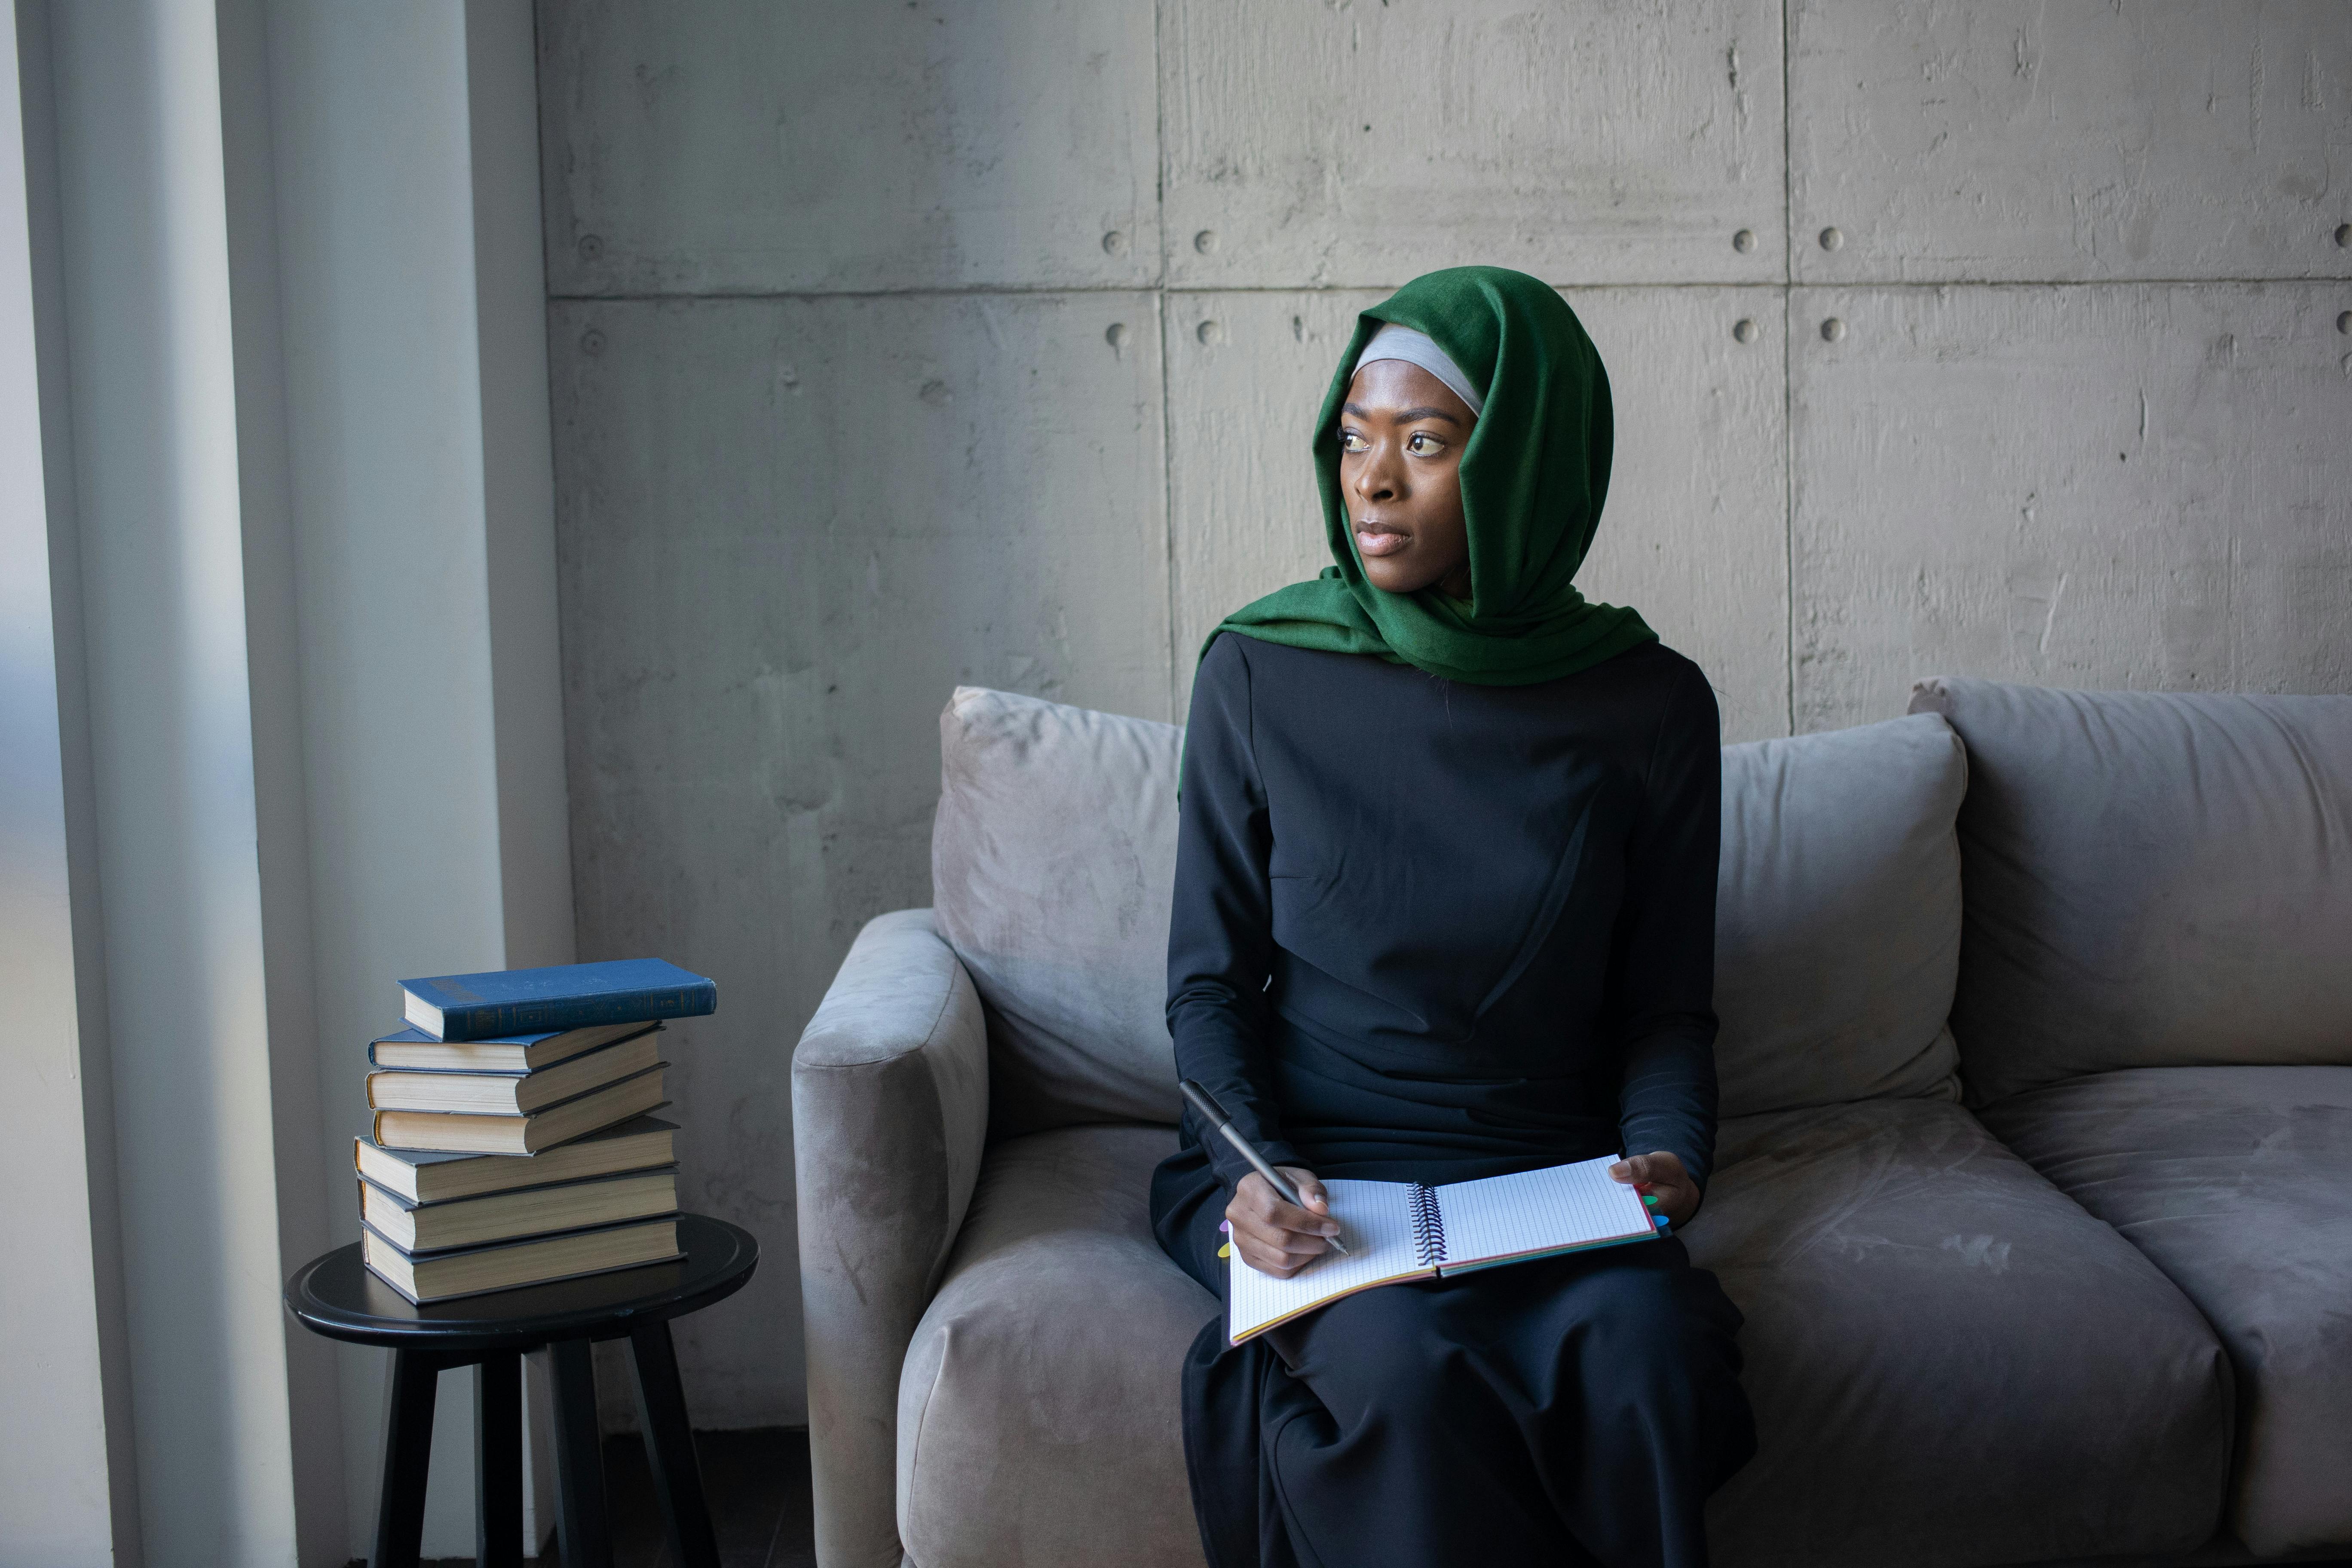 A female student in a hijab holding a pen and notebook on a grey sofa